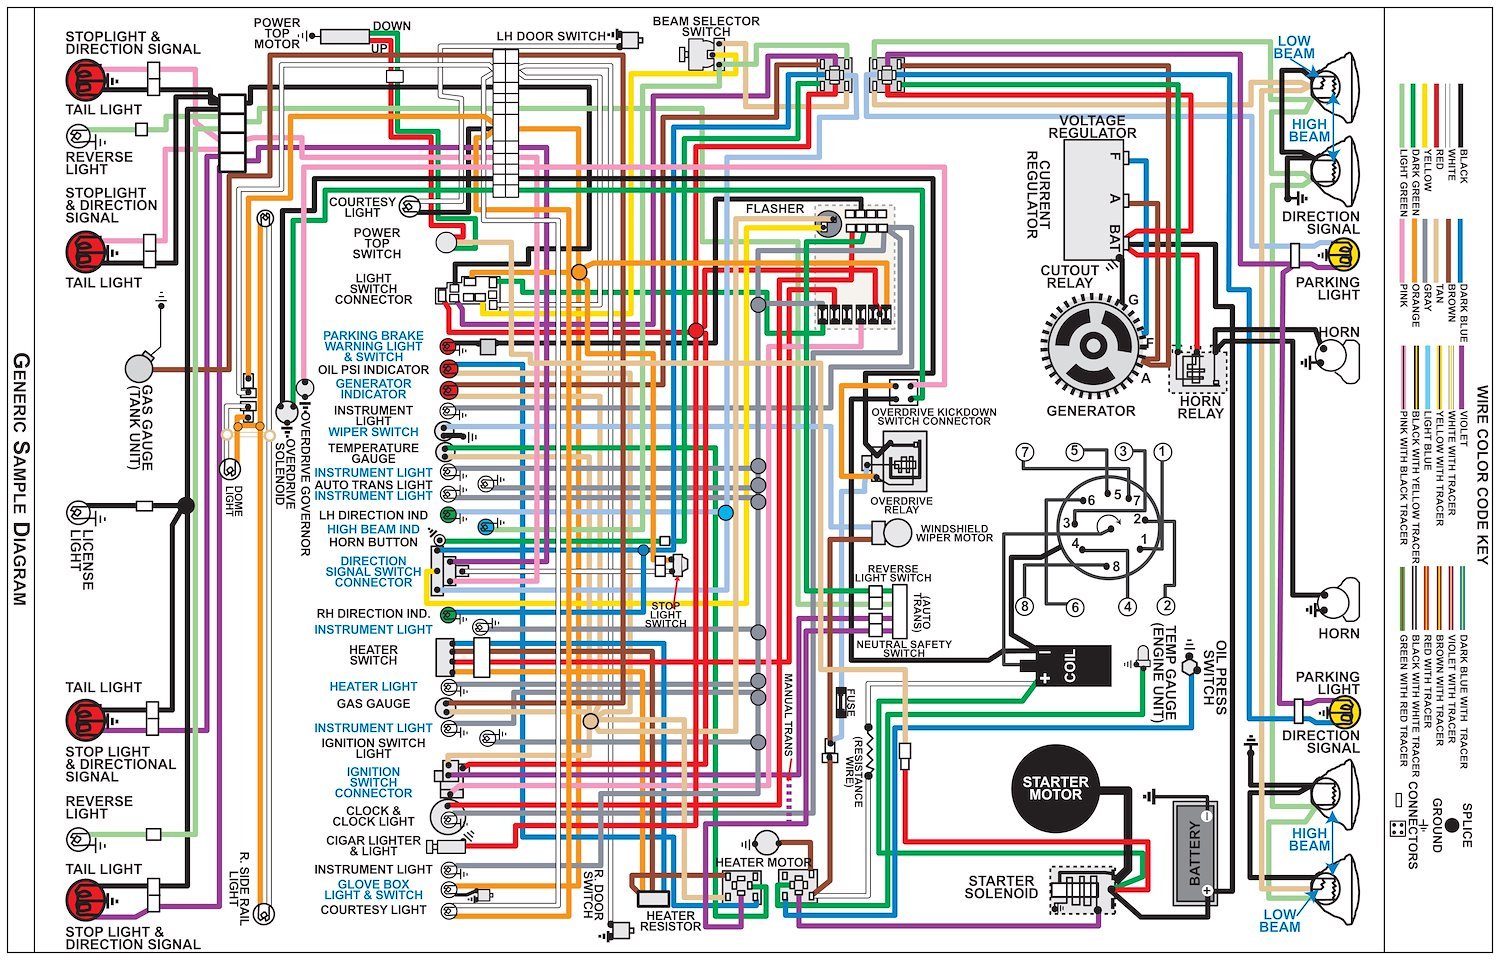 Wiring Diagram for 1963 Ford Falcon, 11 in x 17 in., Laminated